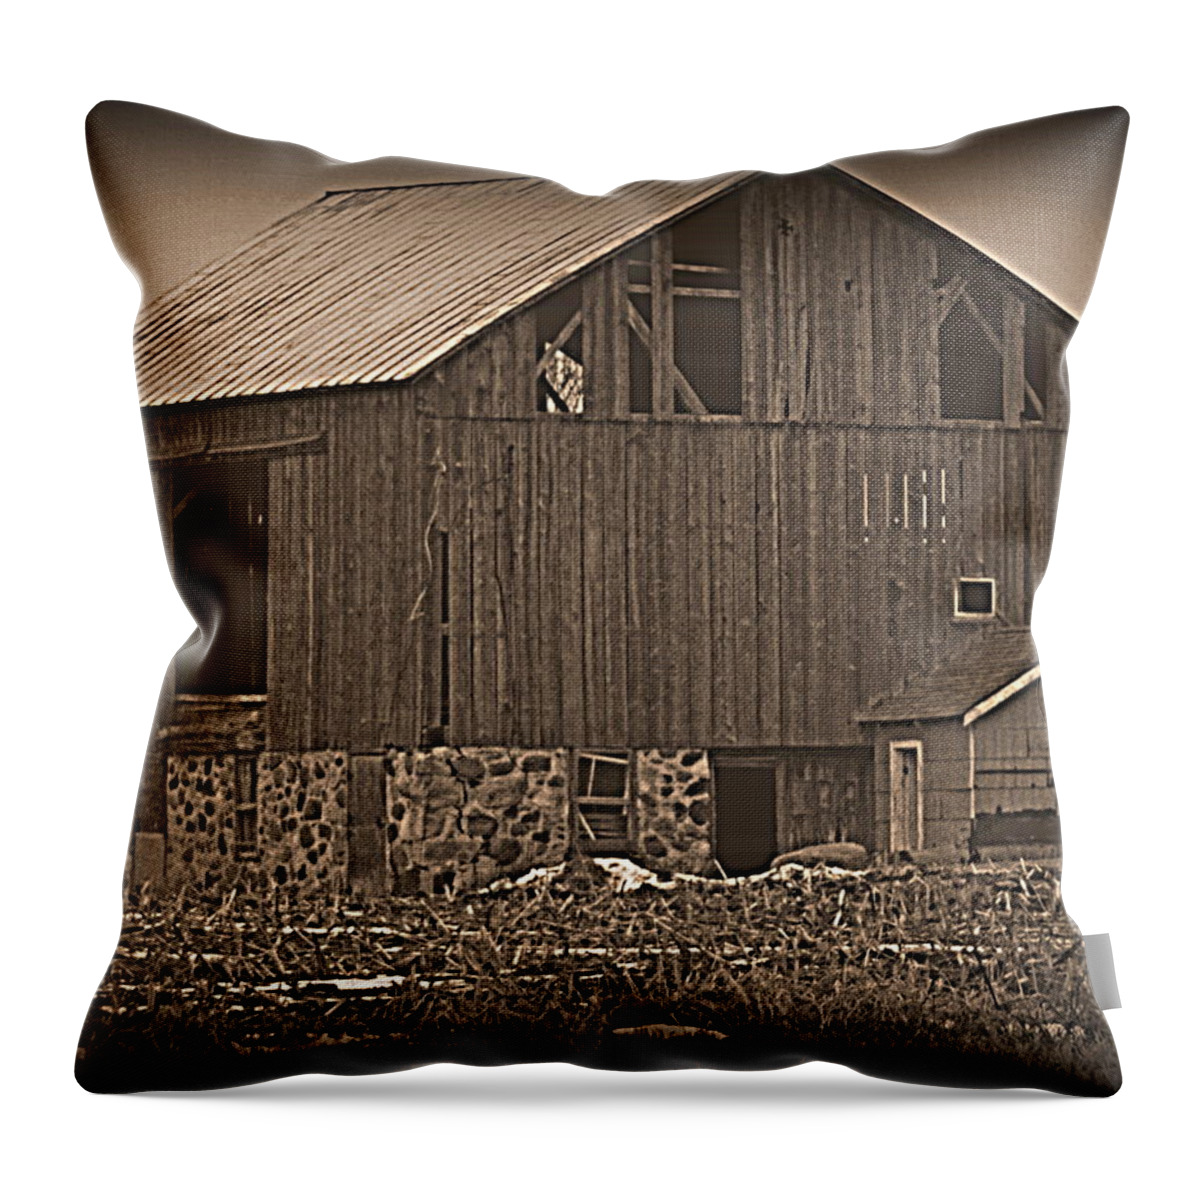  Throw Pillow featuring the photograph Grey Barn by Kimberly Woyak